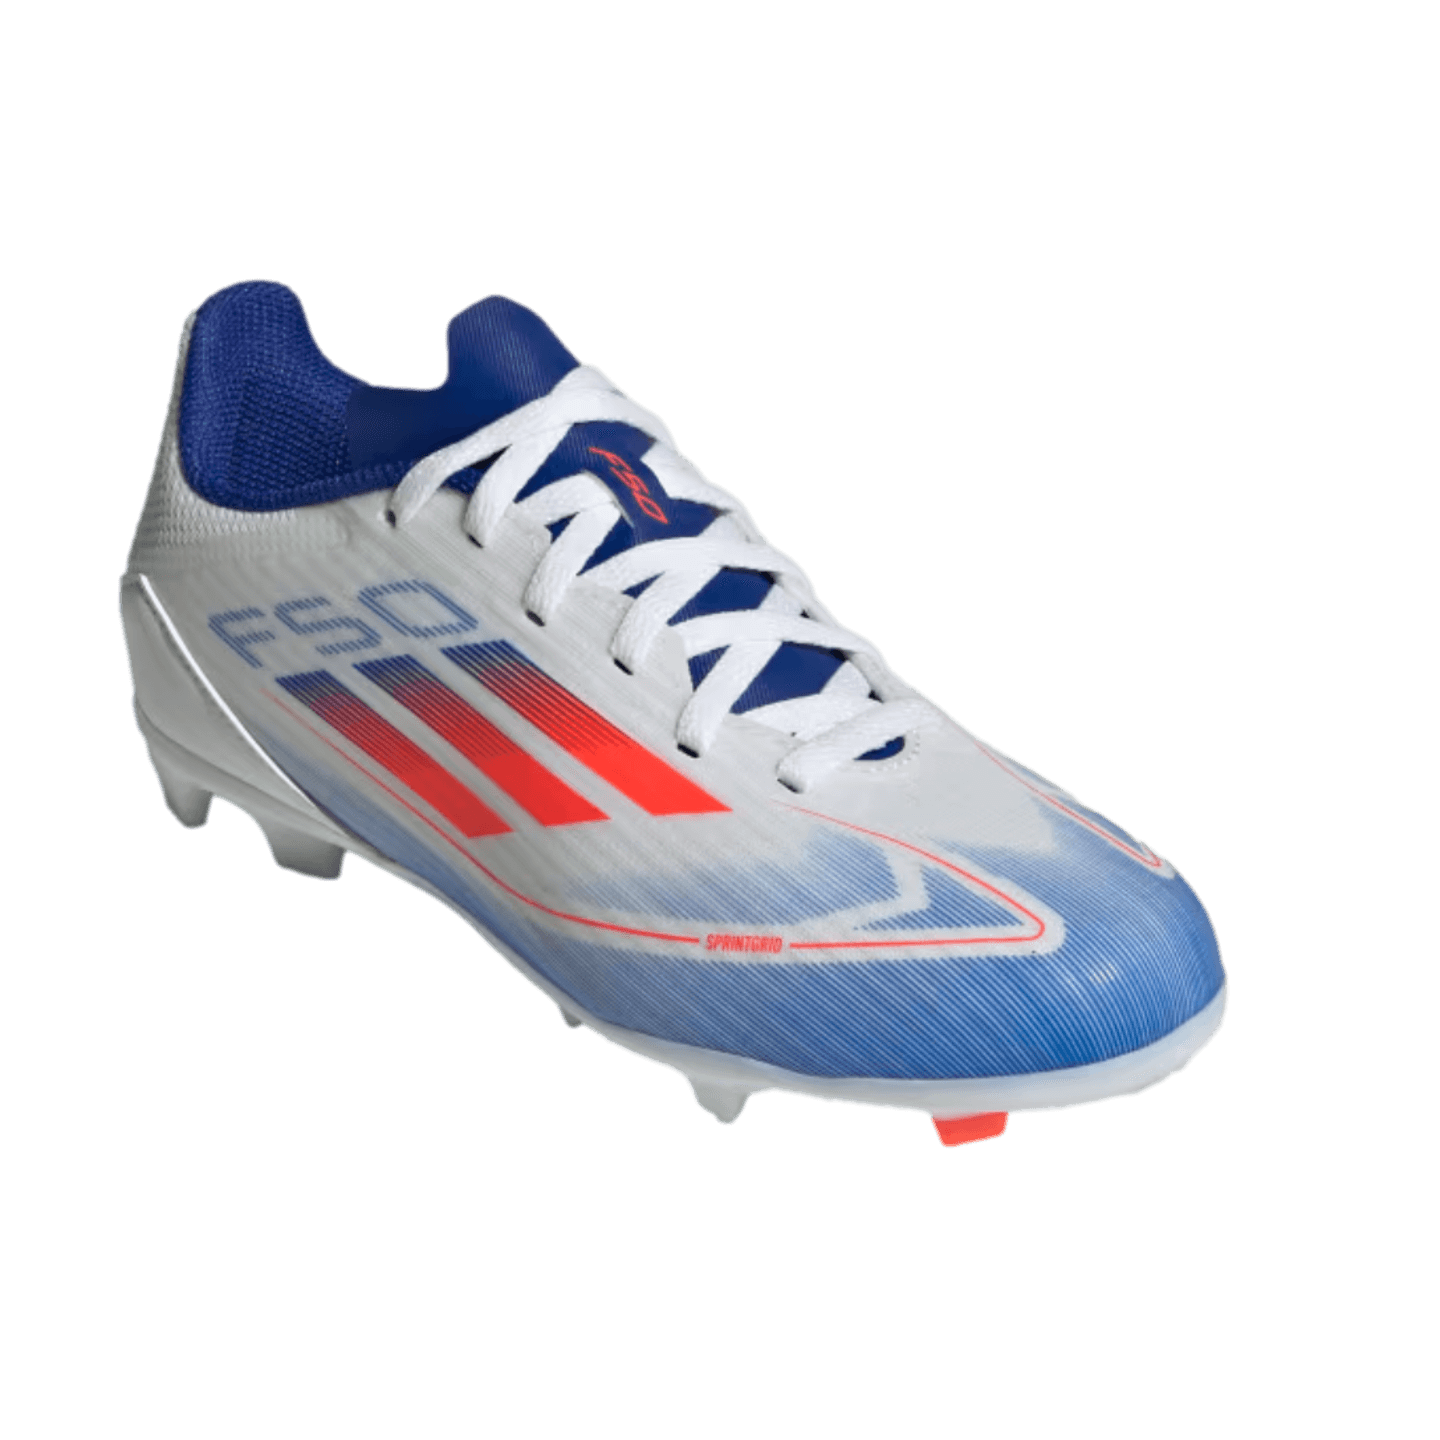 Adidas F50 League Youth Firm Ground Cleats